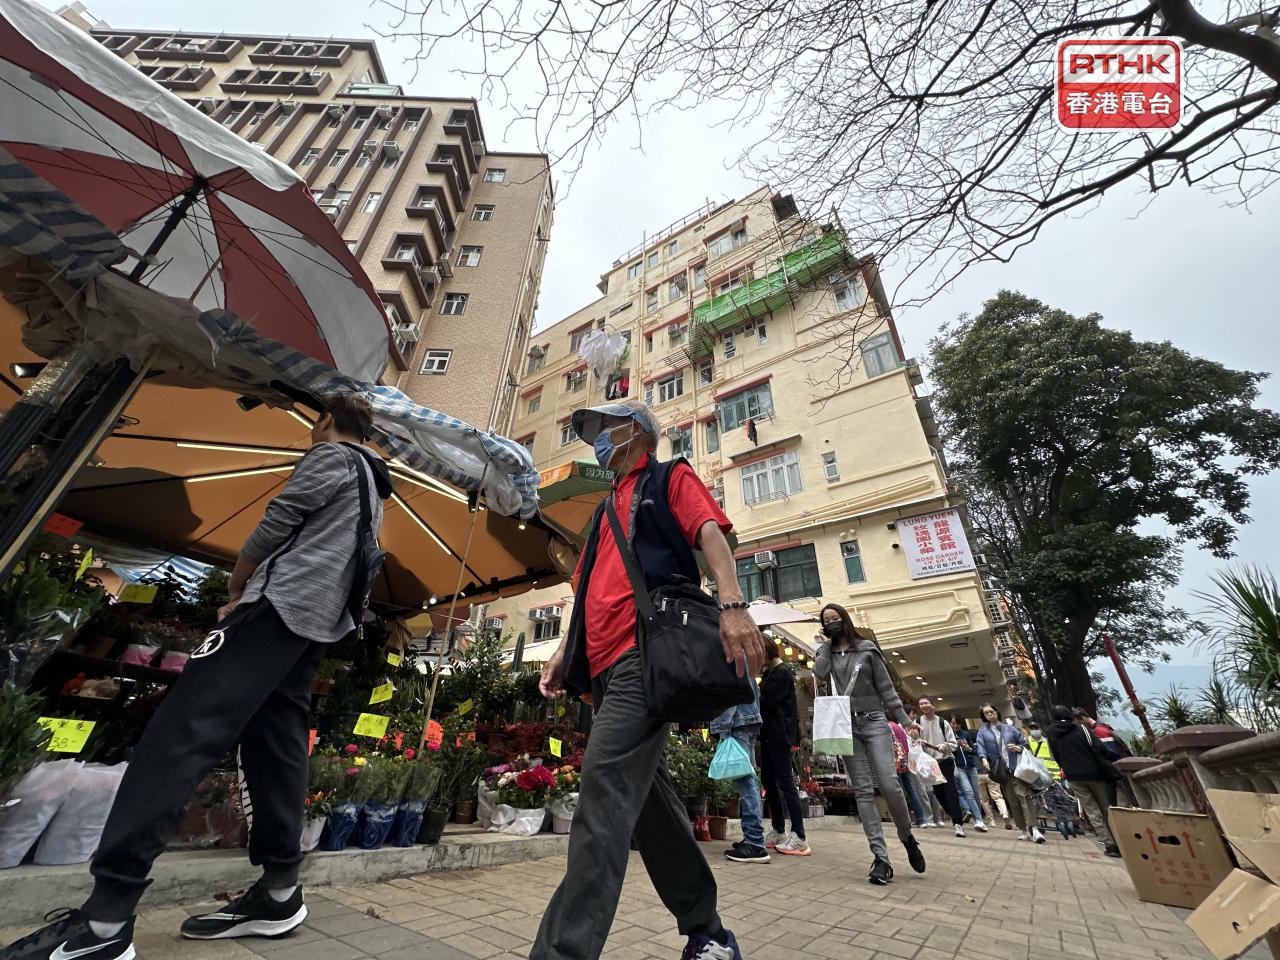 Mixed reactions on redeveloping Flower Market